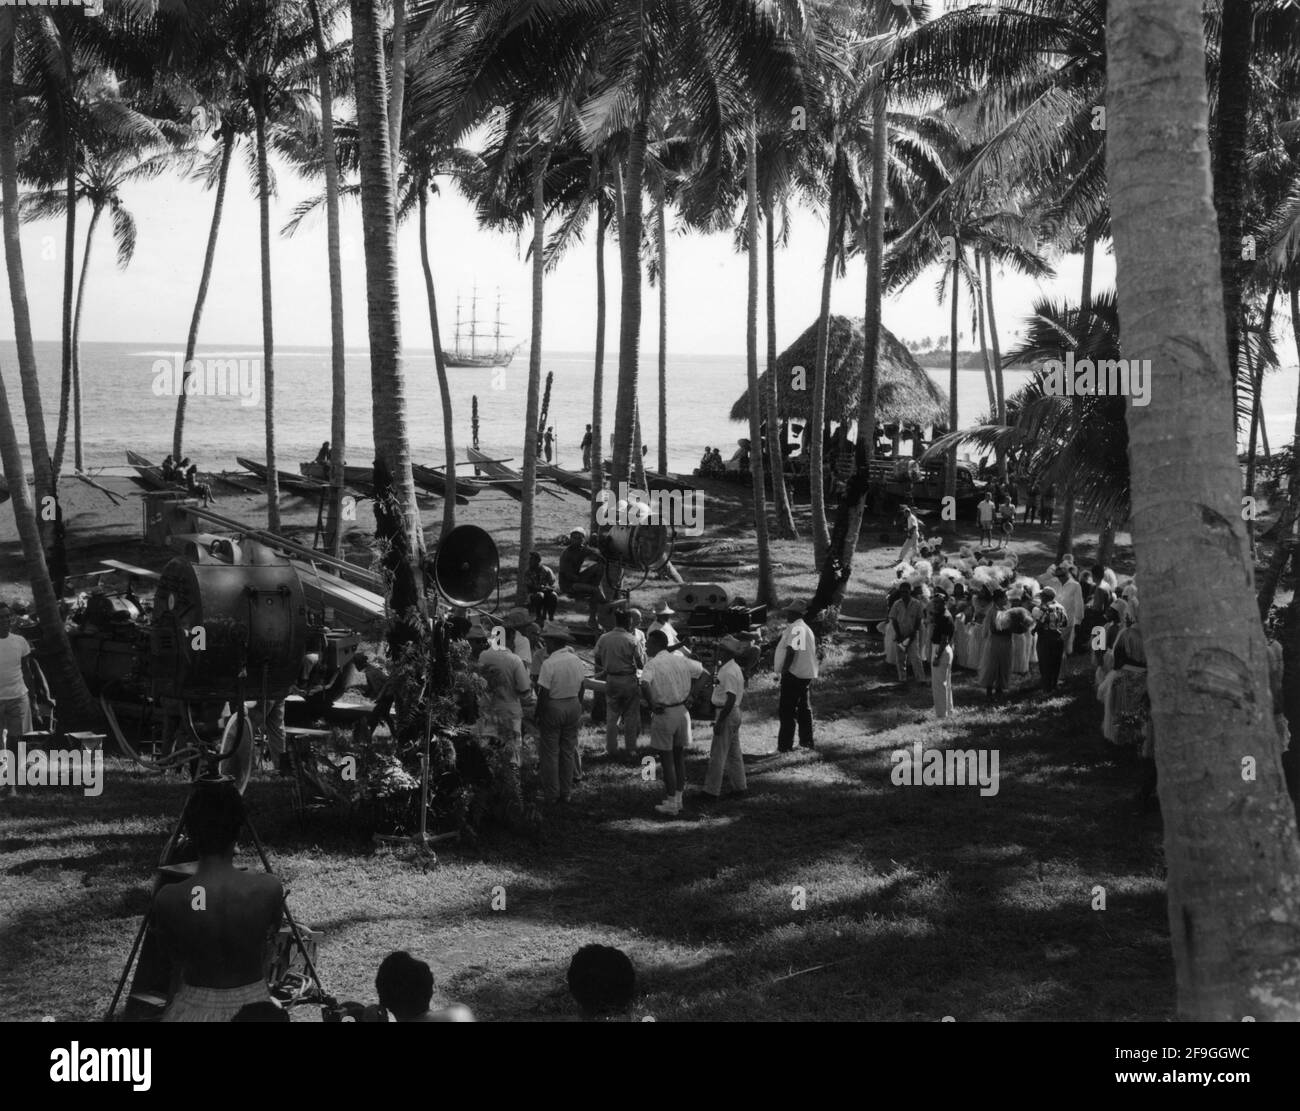 Film Crew filming / rehearsing Native dance sequence on set candid during location shooting of MUTINY ON THE BOUNTY 1962 directors LEWIS MILESTONE and CAROL REED (uncredited) novel James Nordhoff and James Norman Hall screenplay Charles Lederer Arcola Pictures / Metro Goldwyn Mayer Stock Photo